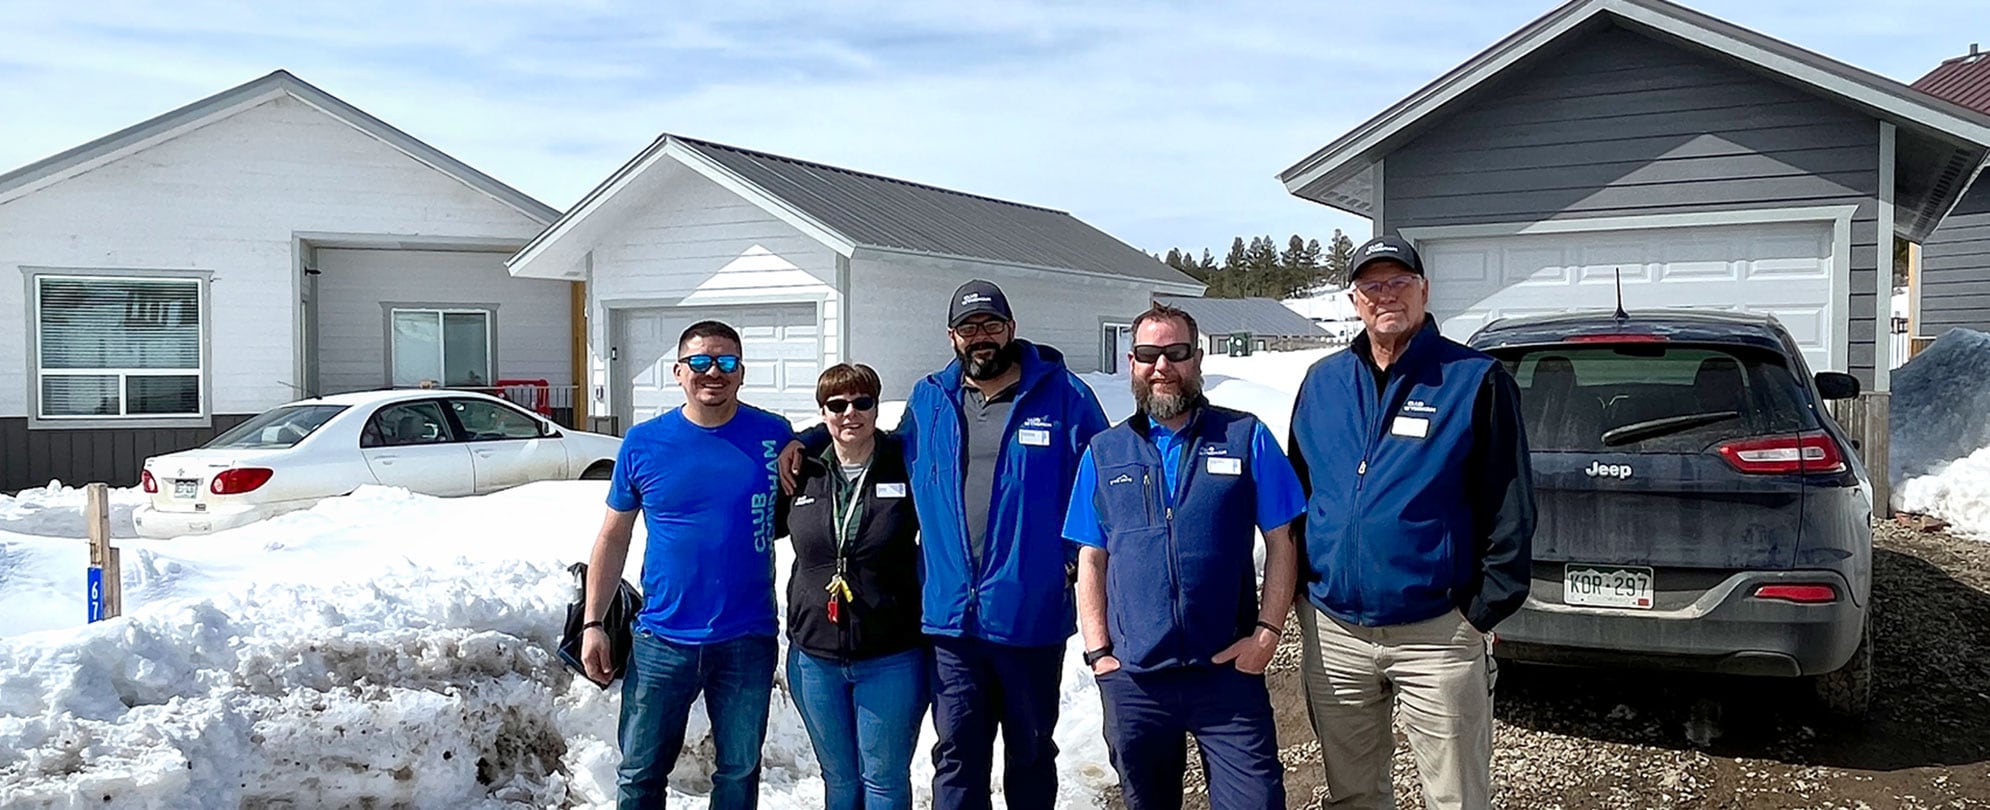 Employees from the WorldMark Pagosa resort, four men and one woman, stand in front of a pair of newly built houses with a dark car in one driveway, a white car in the other driveway, and large amounts of snow piled up in between the houses. 